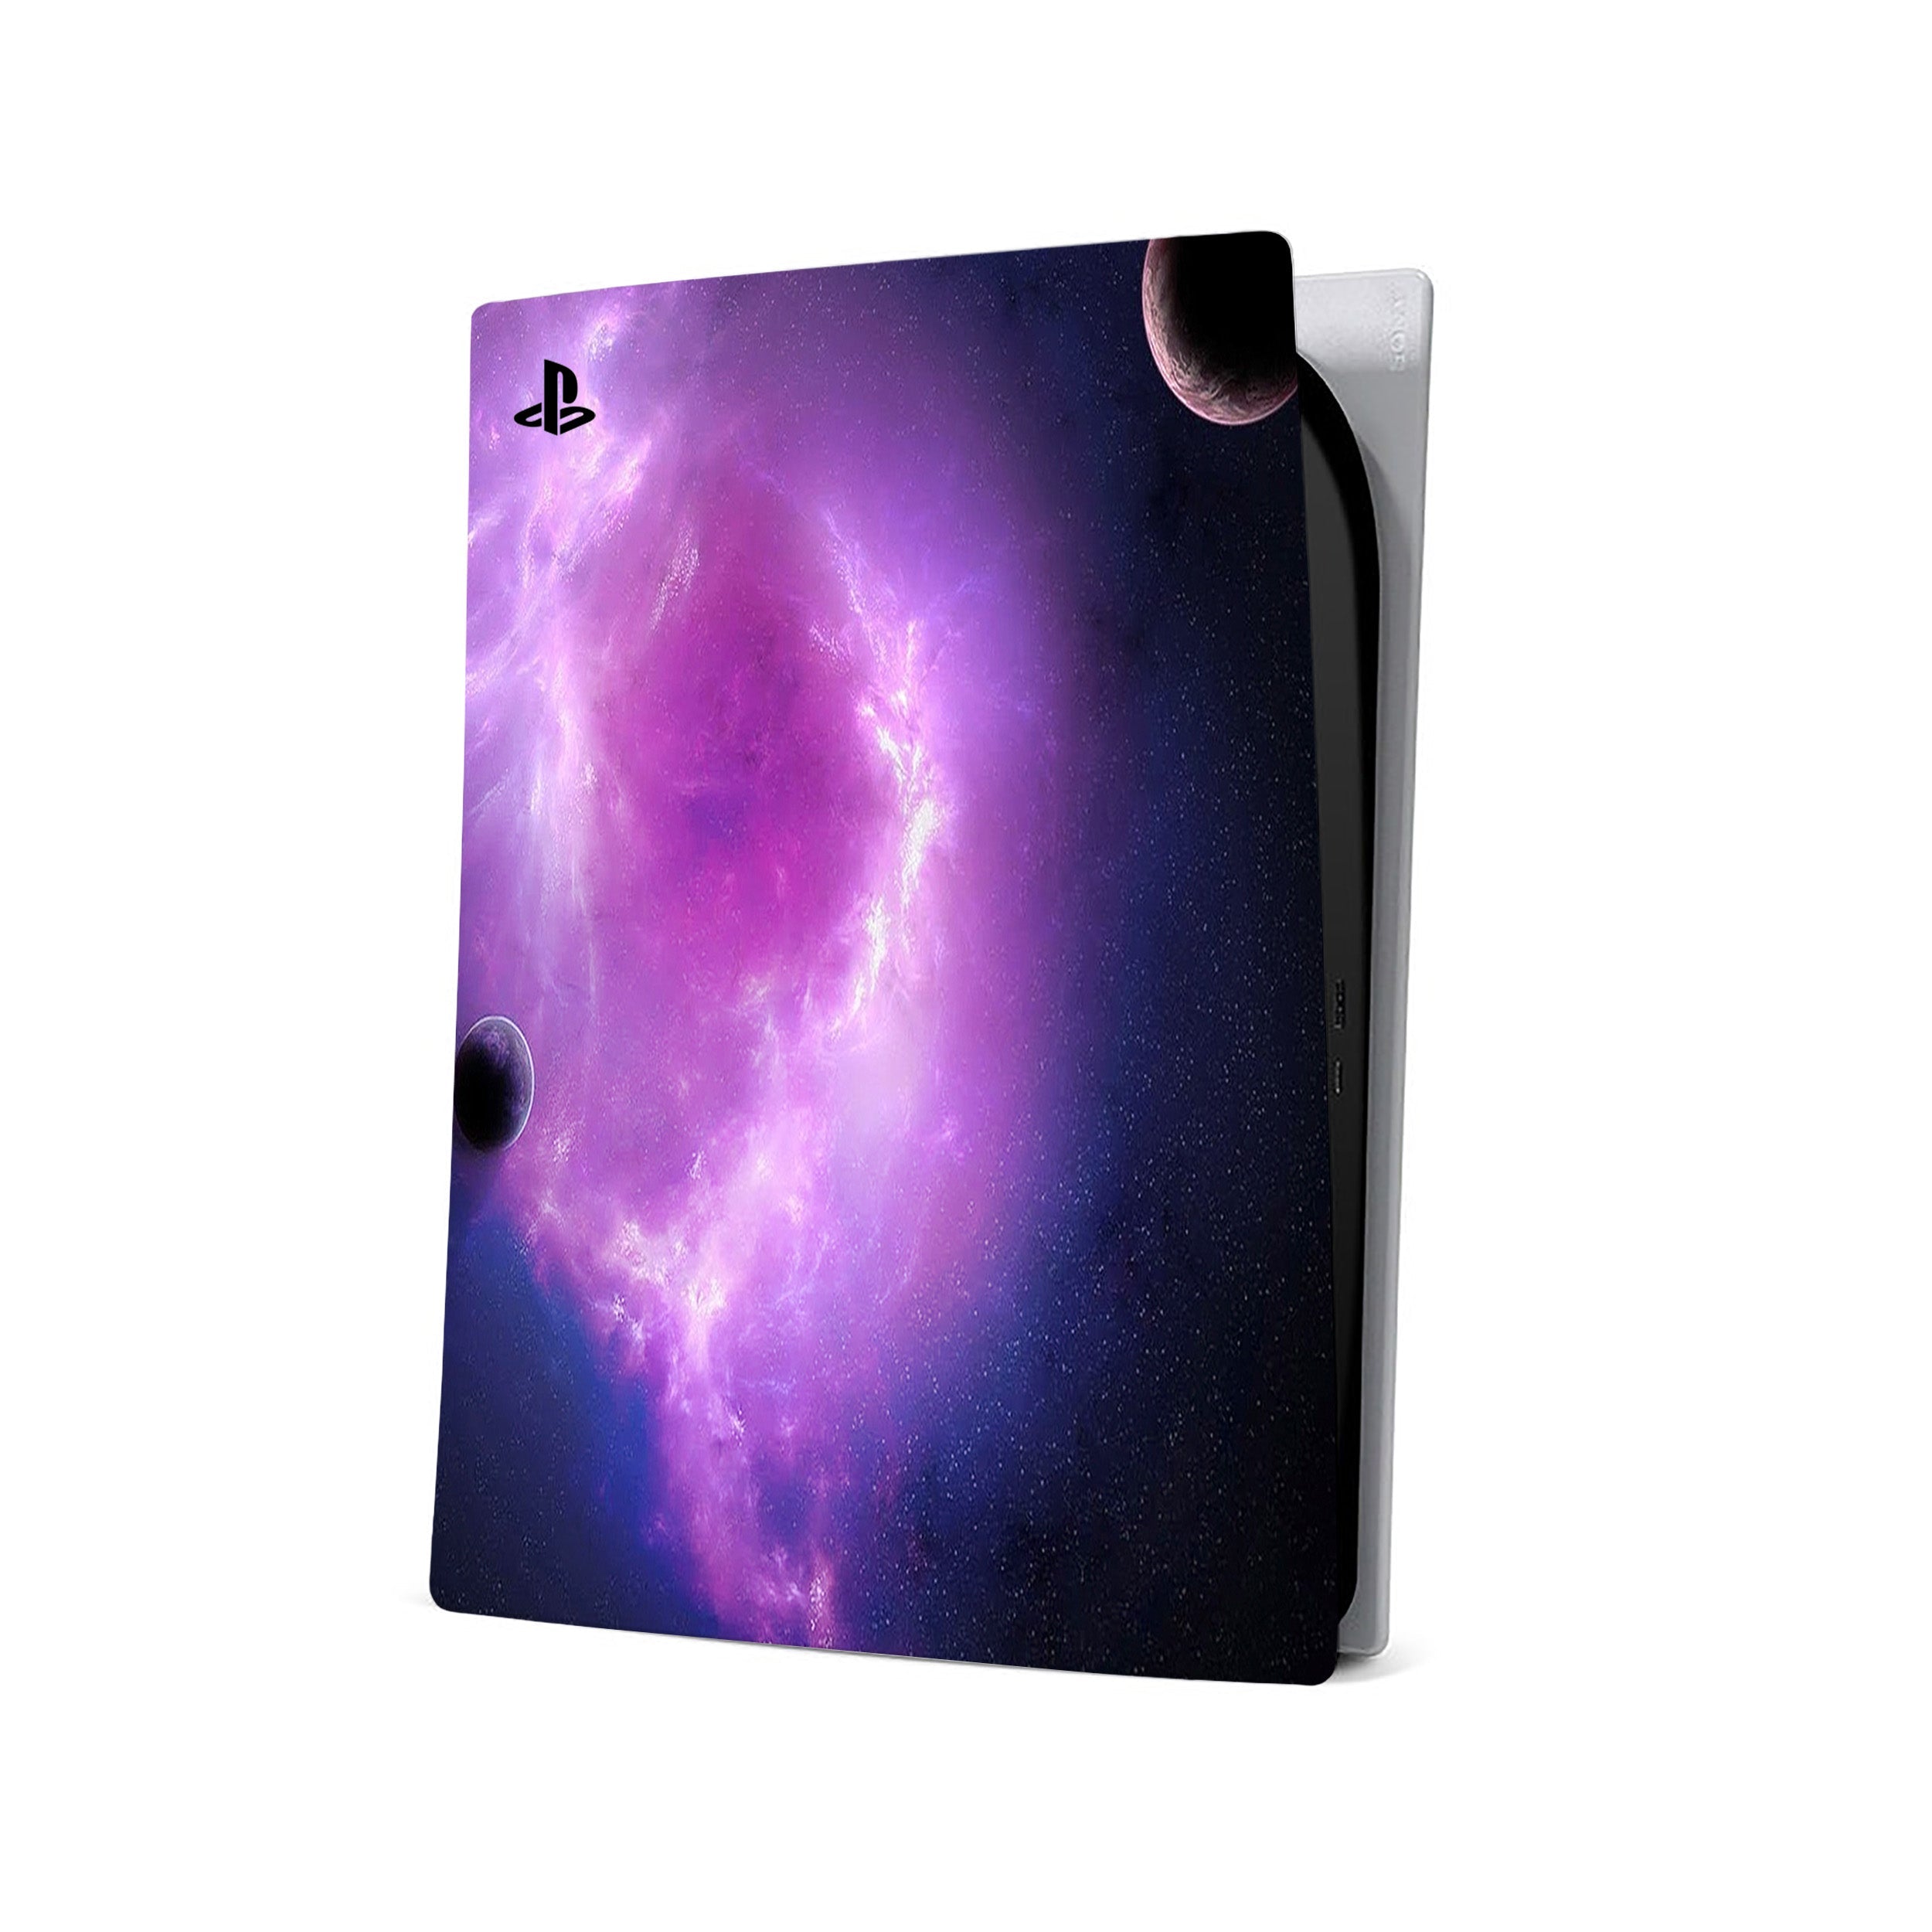 A video game skin featuring a Space design for the PS5.